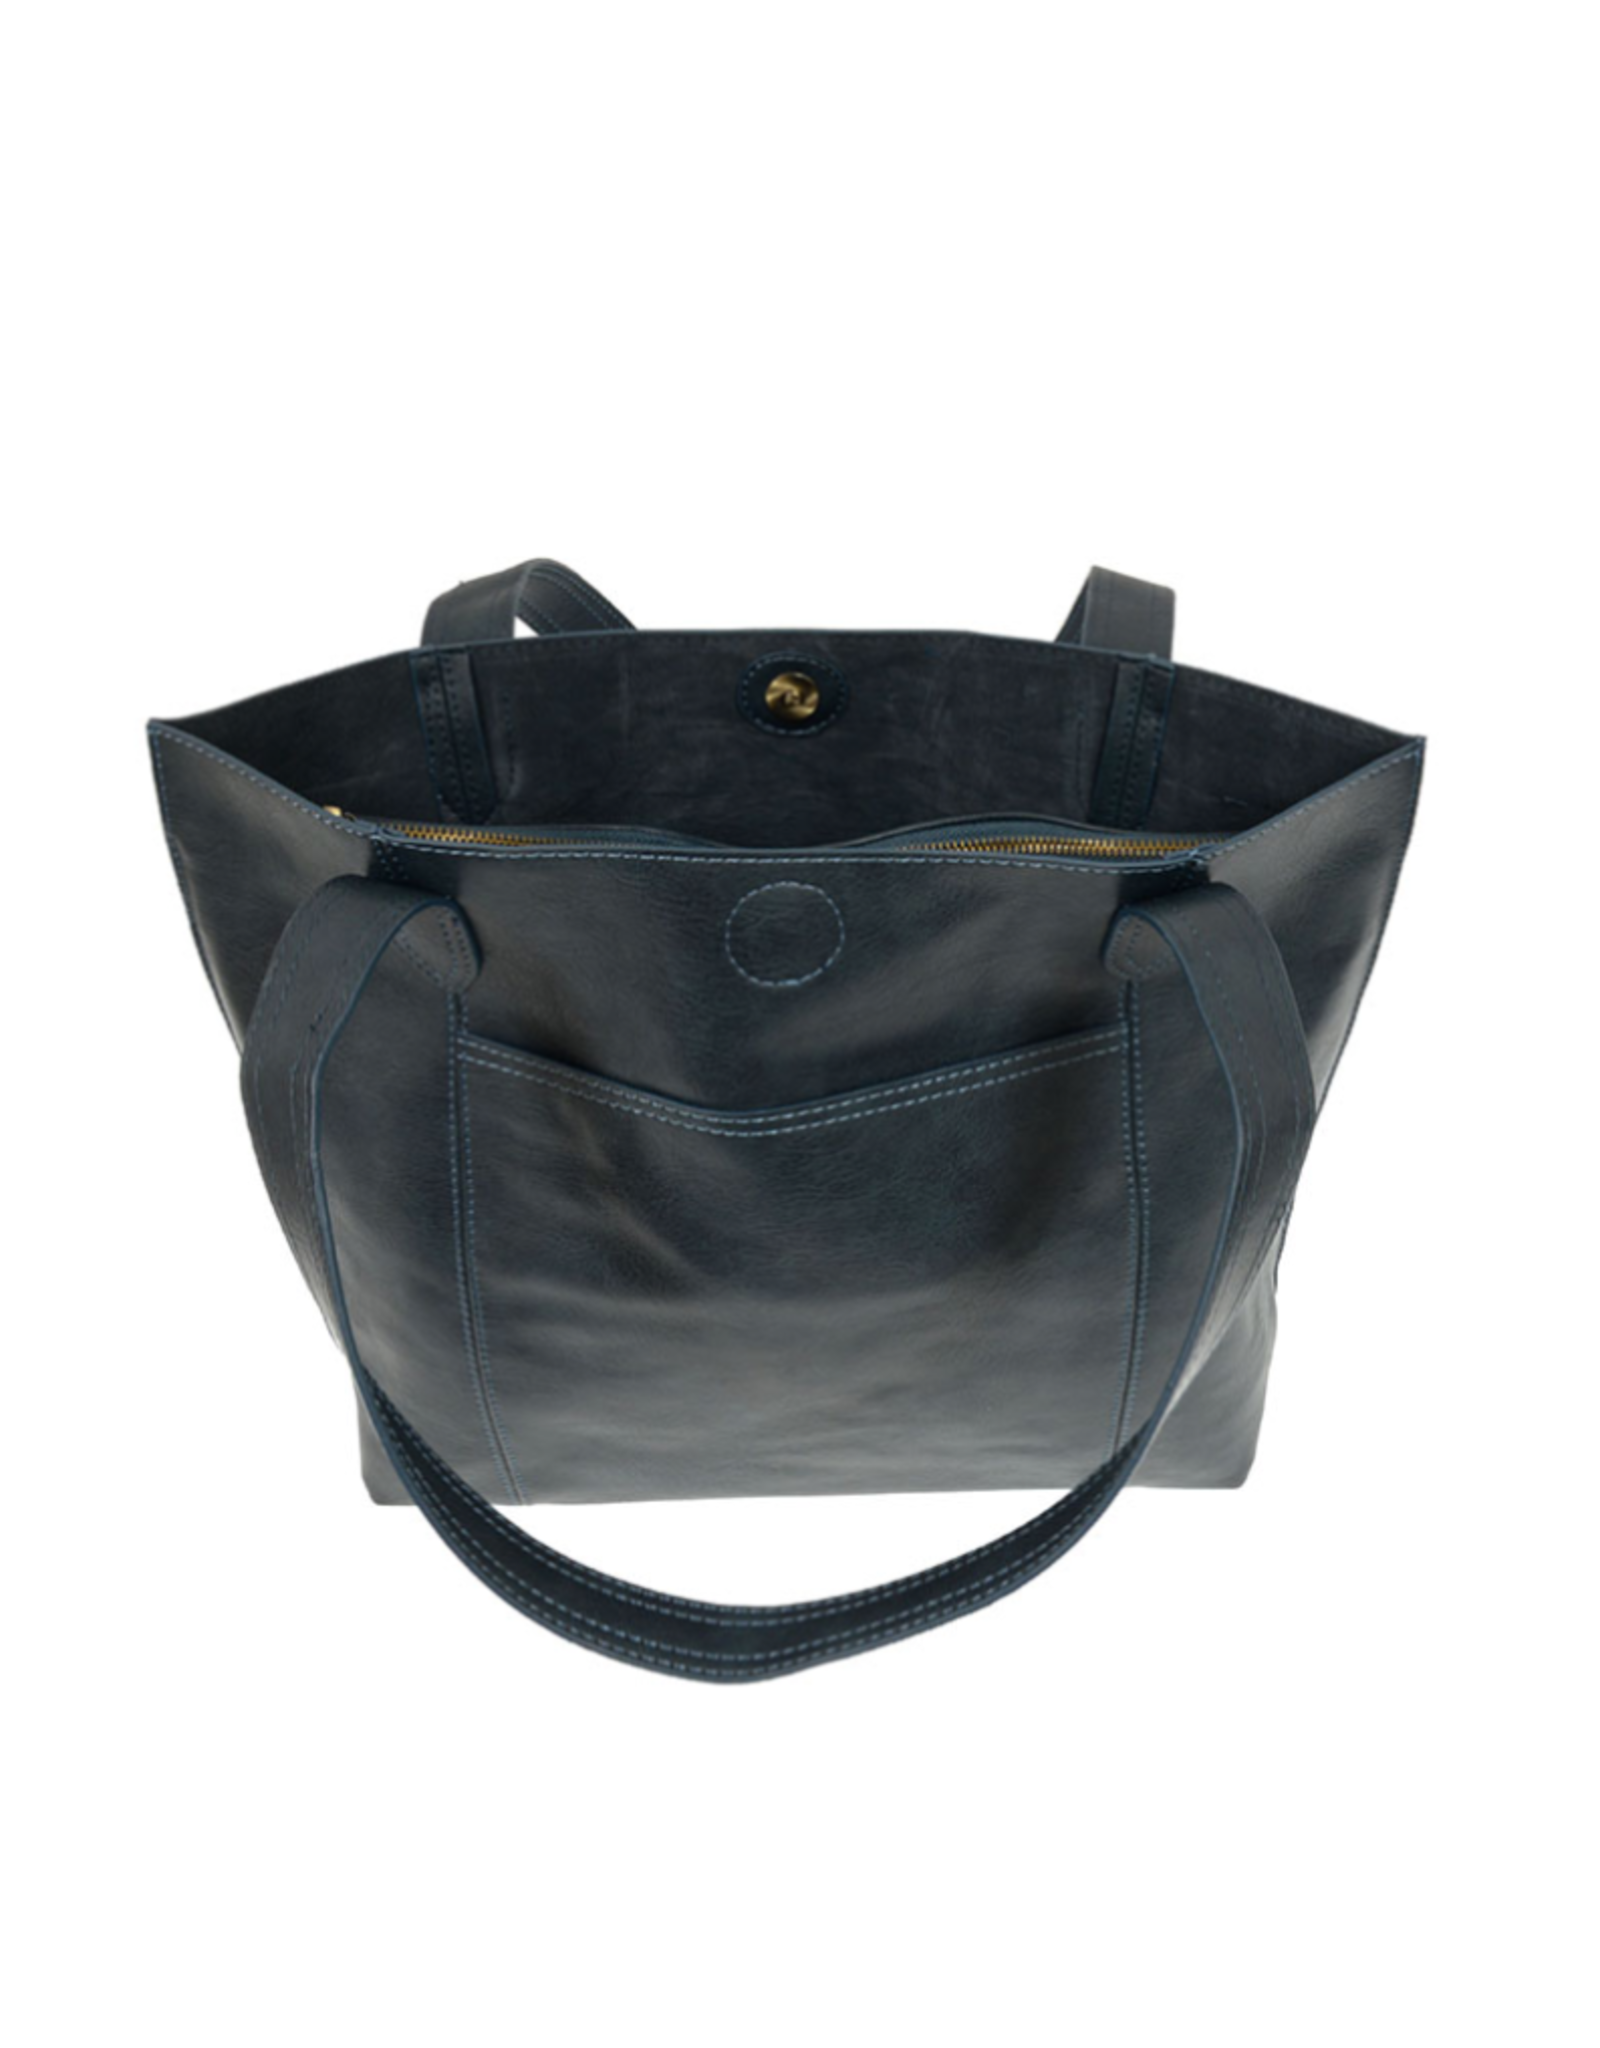 Taylor Oversized Tote Dark Teal